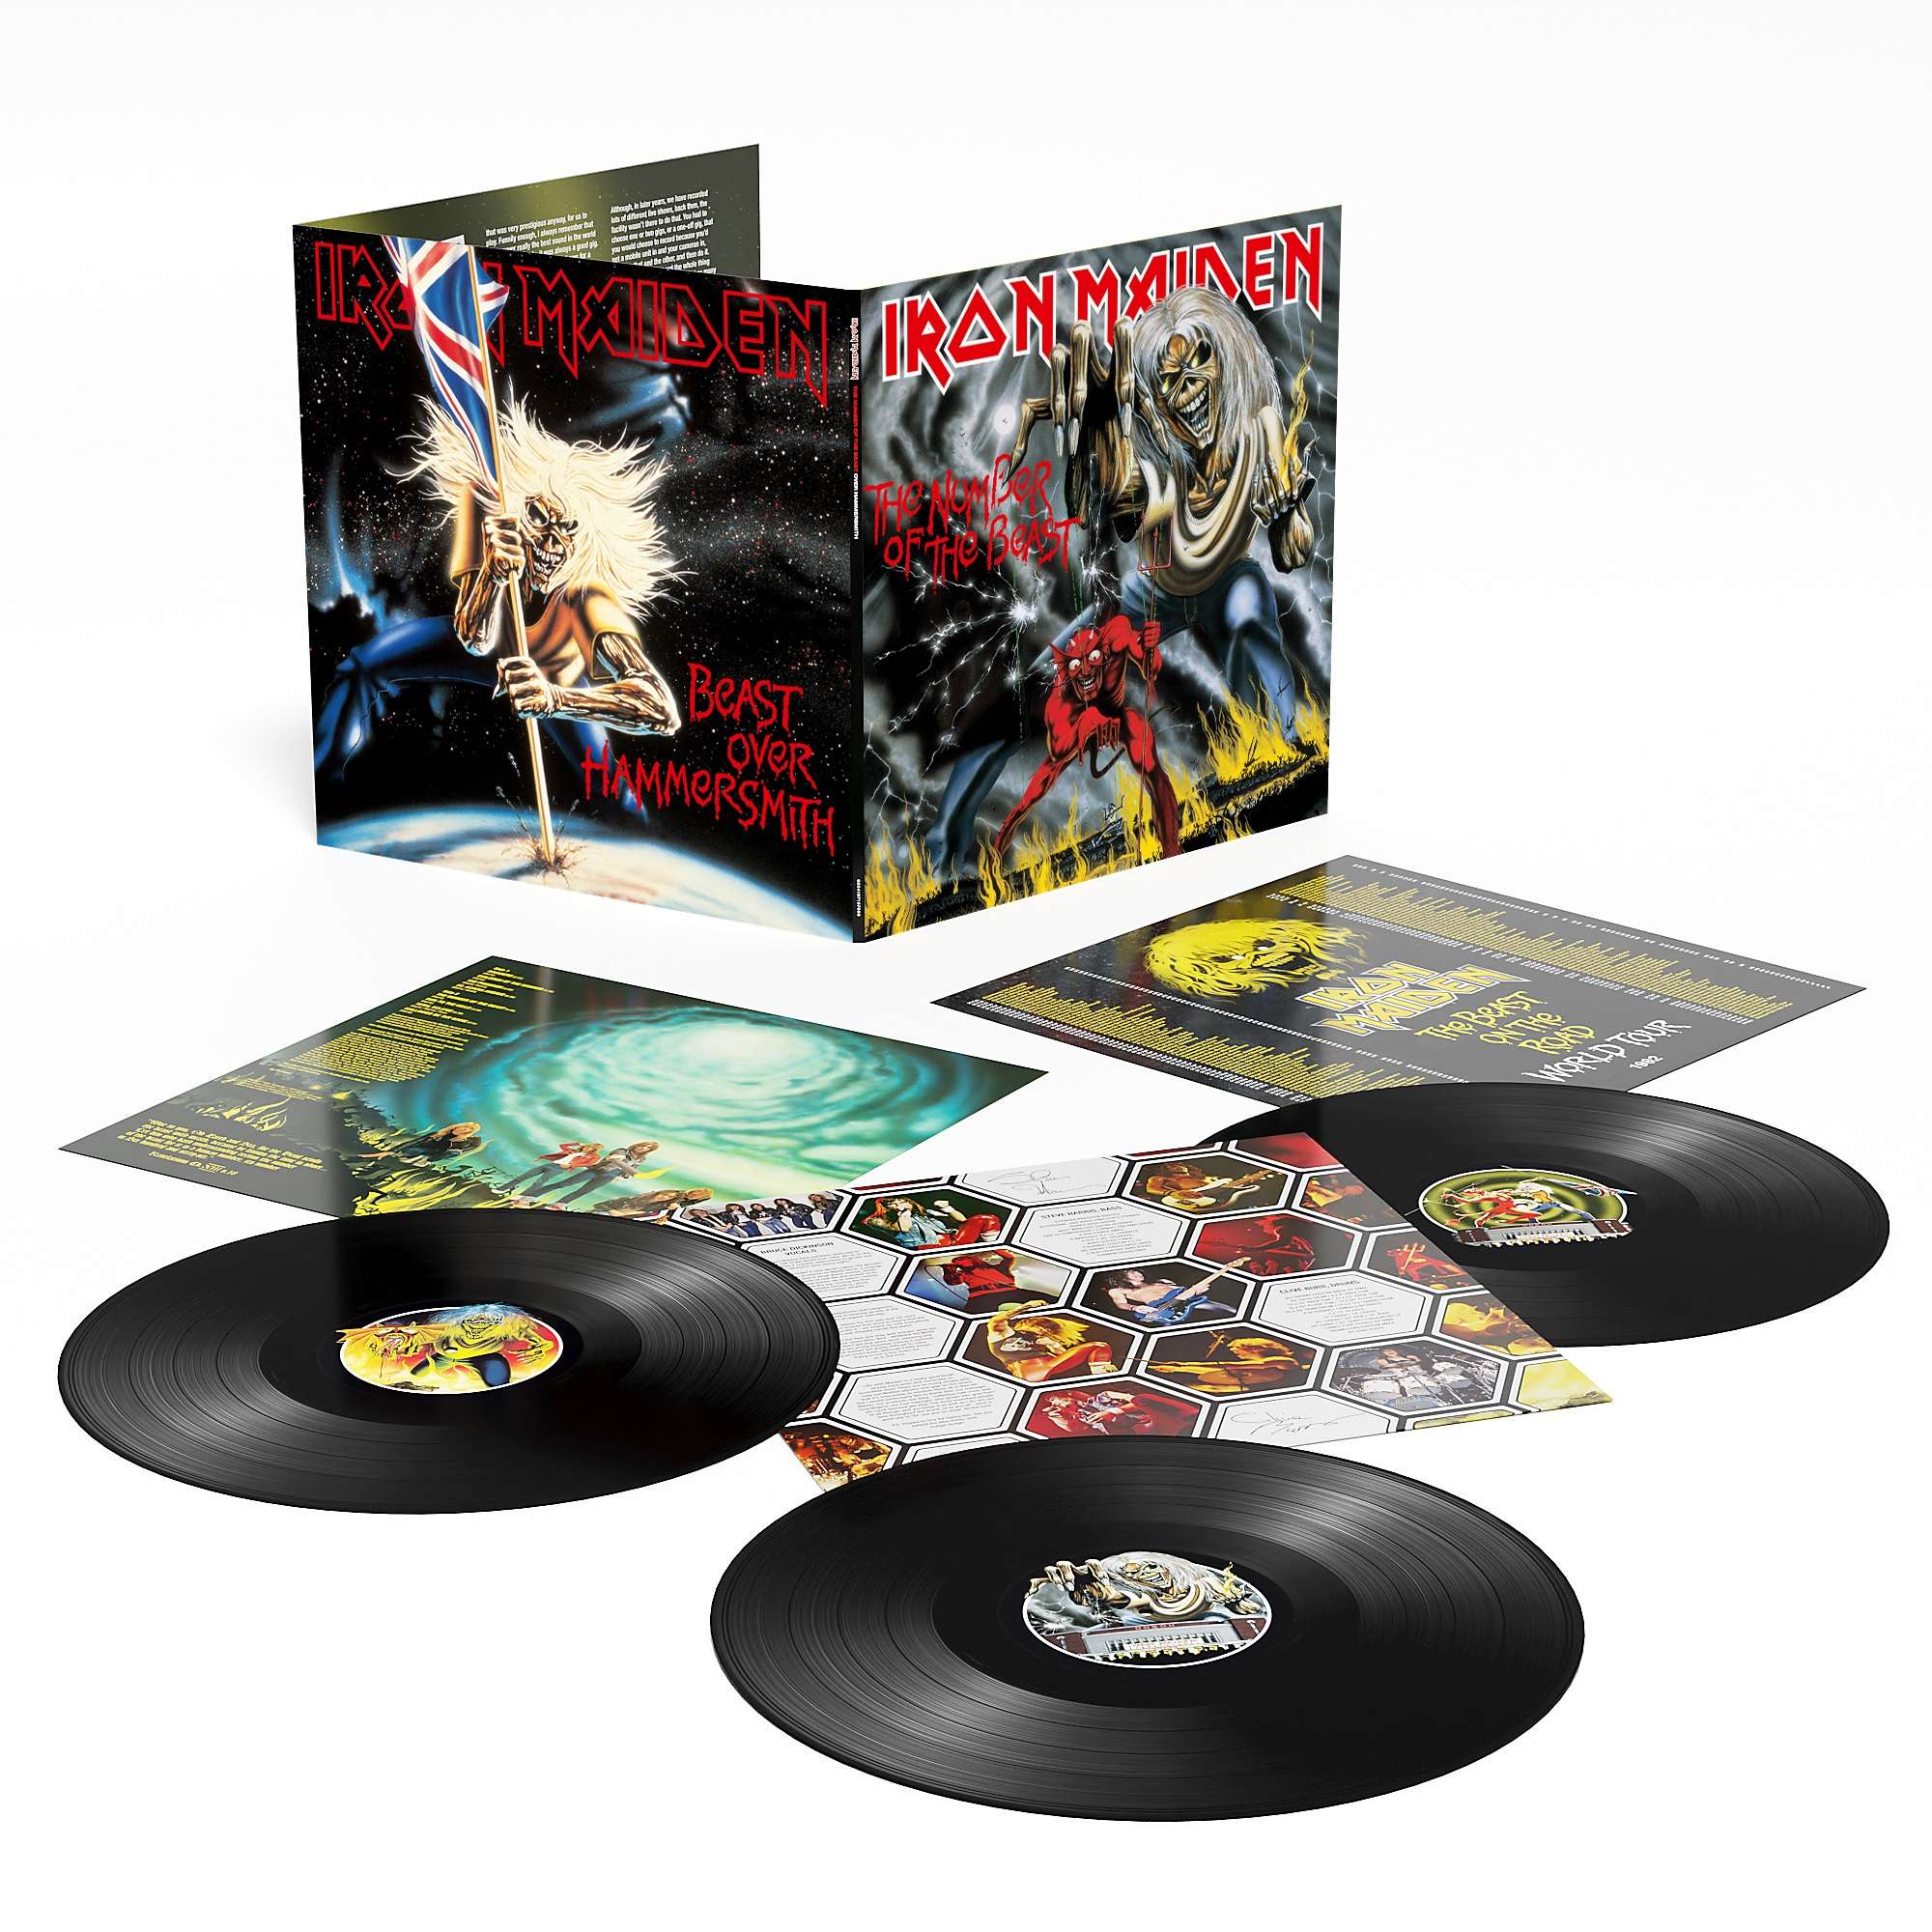 Iron Maiden
 - The Number Of The Beast / Beast Over Hammersmith (40th Anniversary Edition) (180g) (Black Vinyl)
